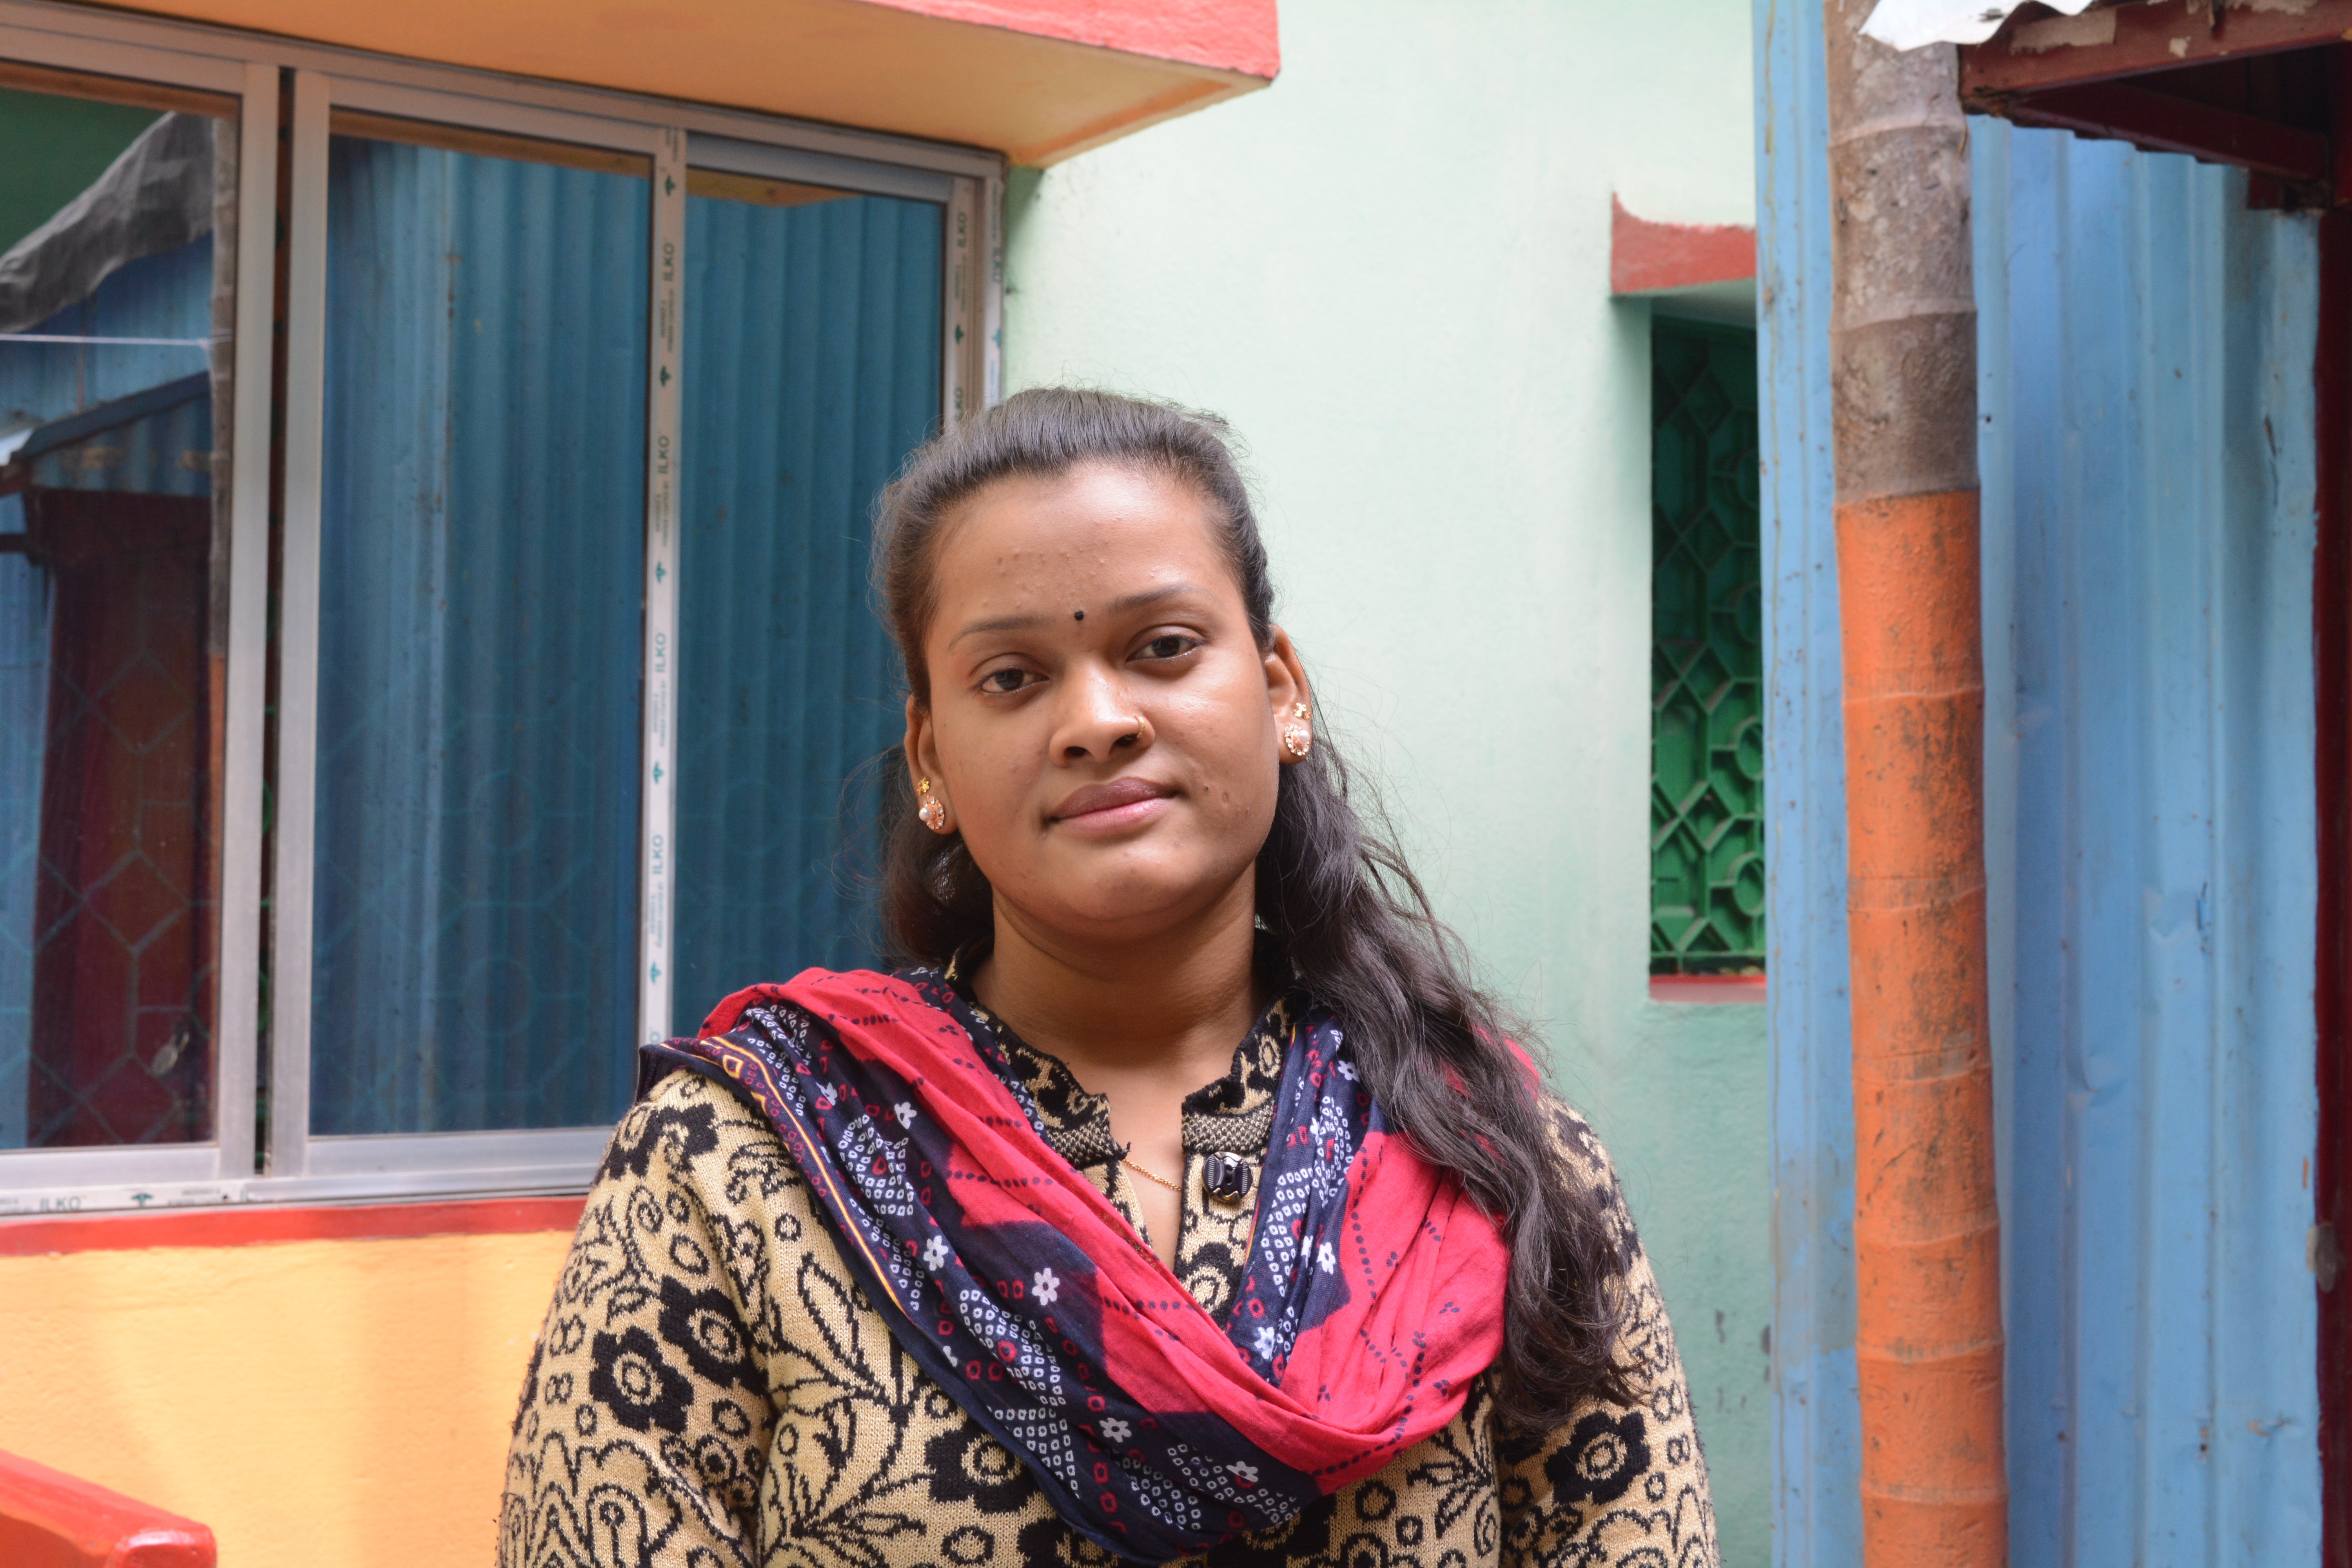 Rahima Khan was 13 when she was trafficked from West Bengal to Maharashtra